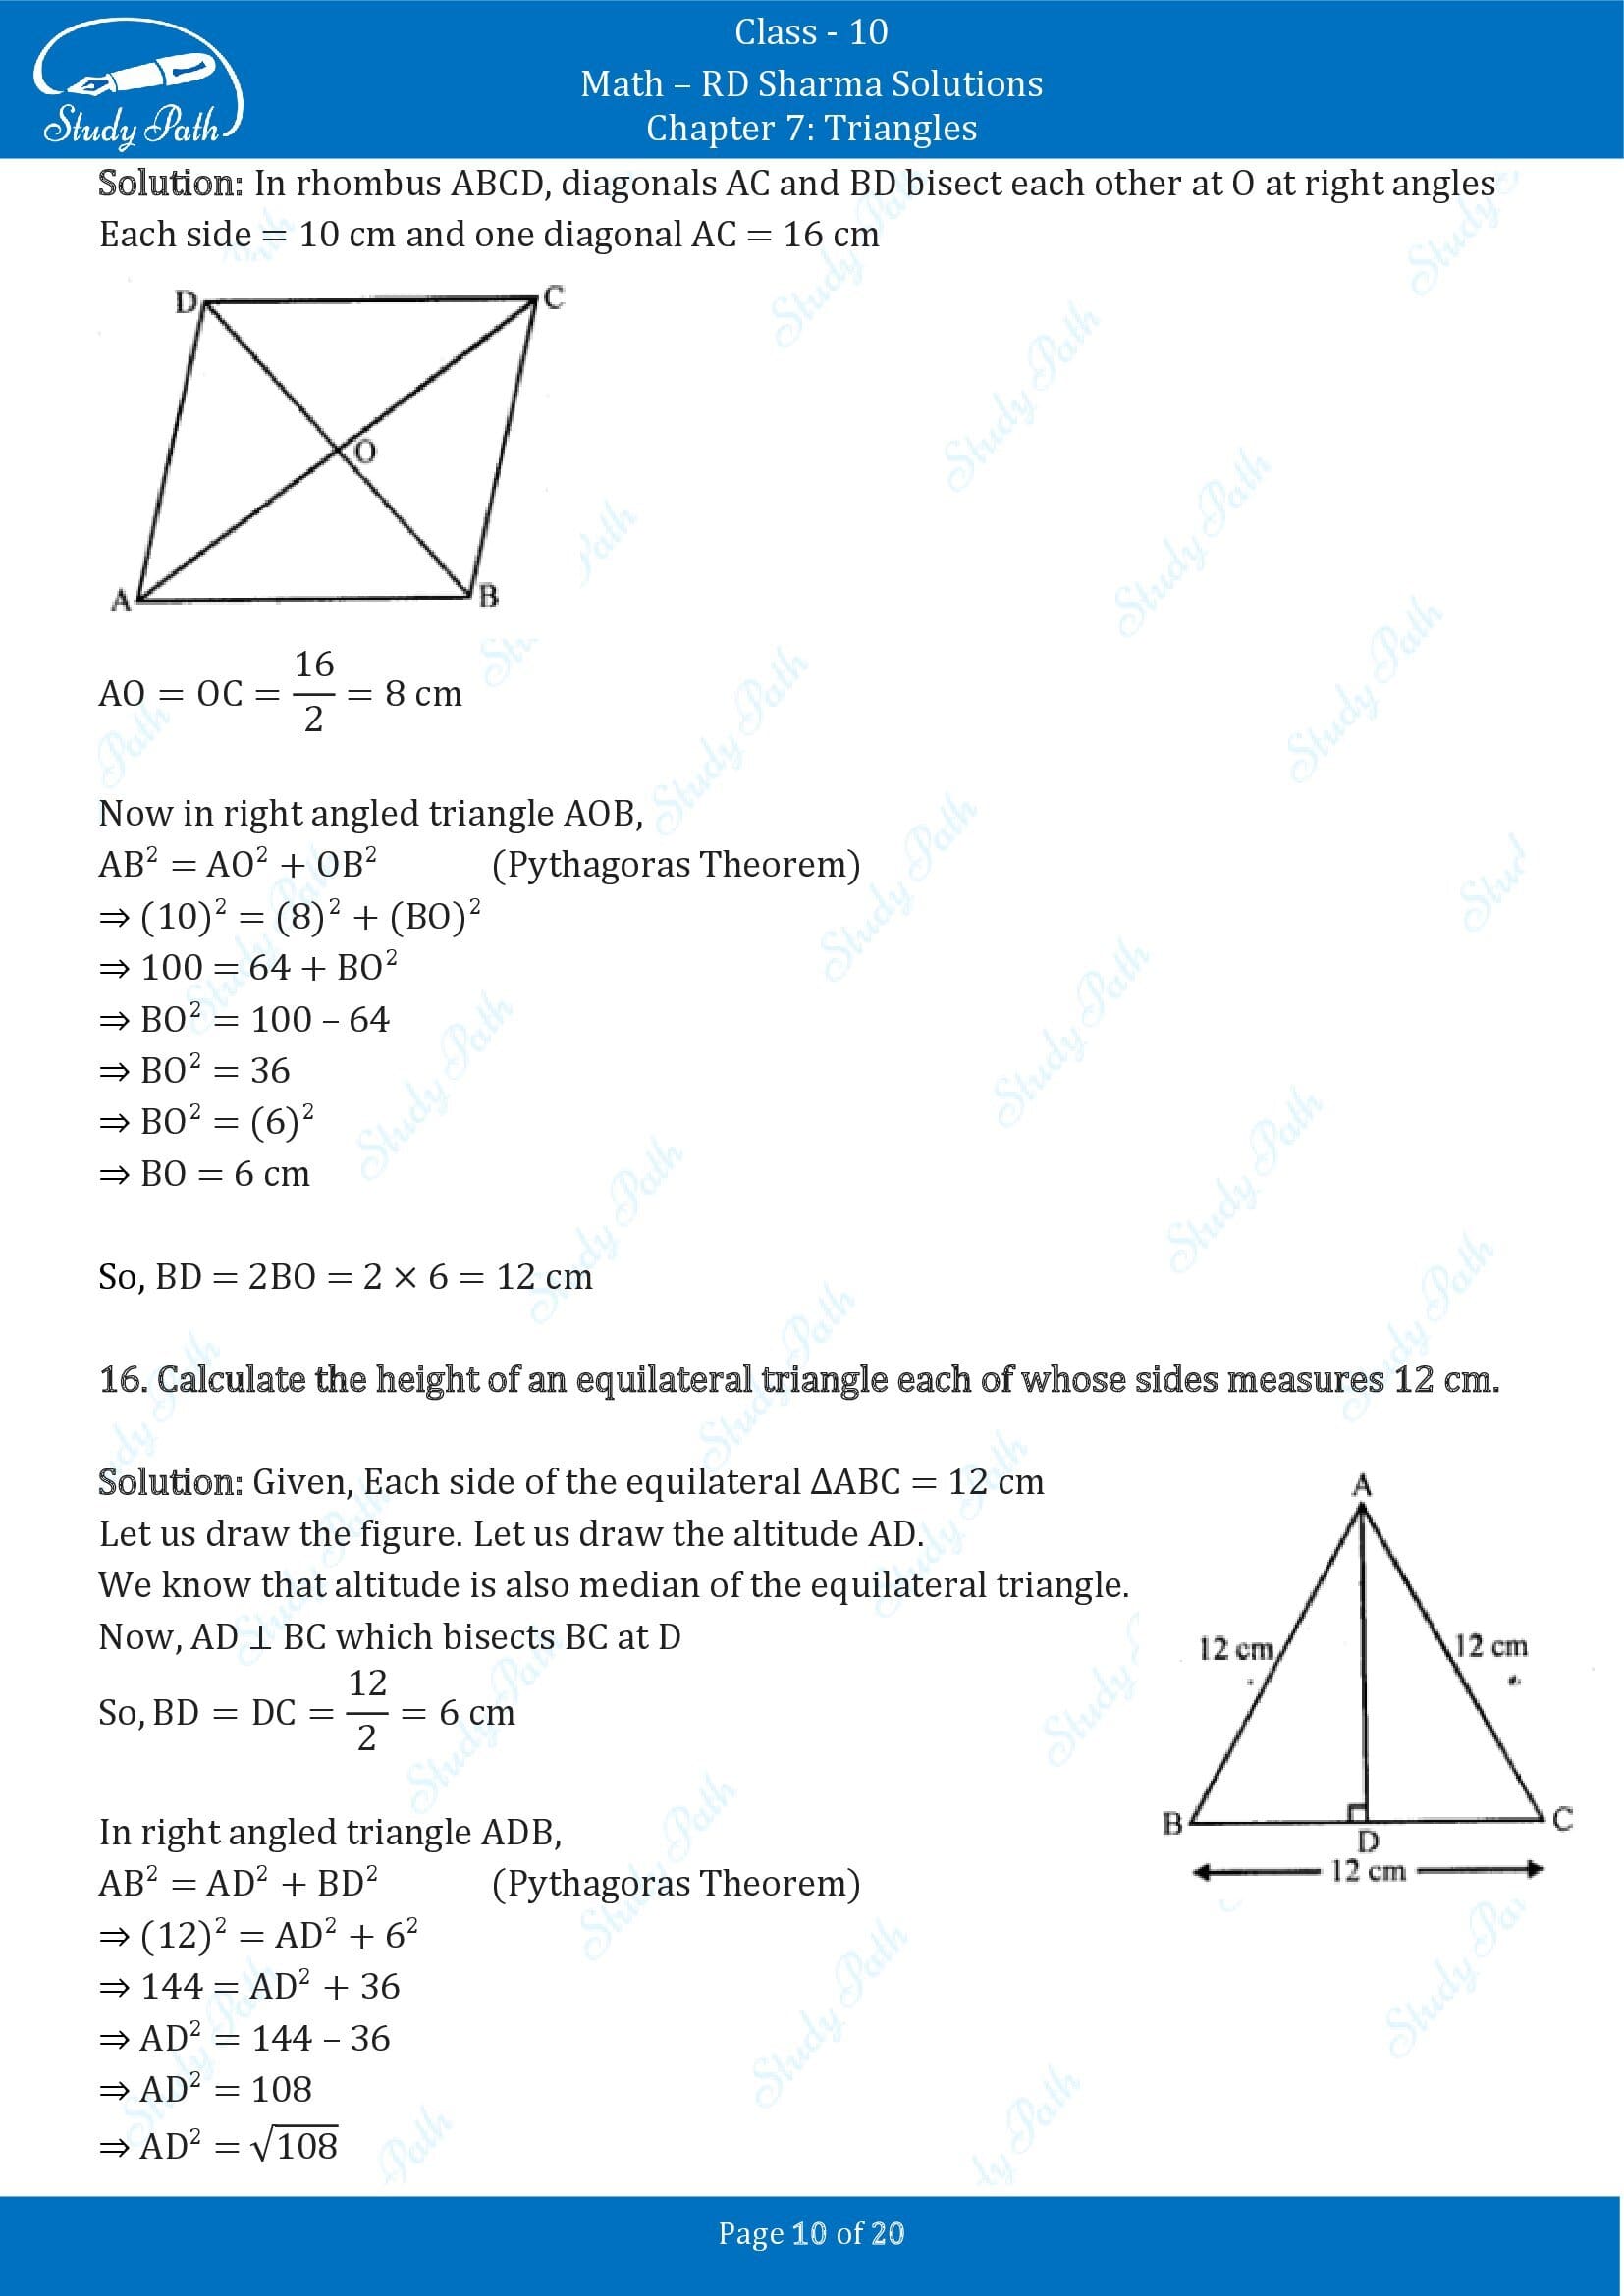 RD Sharma Solutions Class 10 Chapter 7 Triangles Exercise 7.7 00010